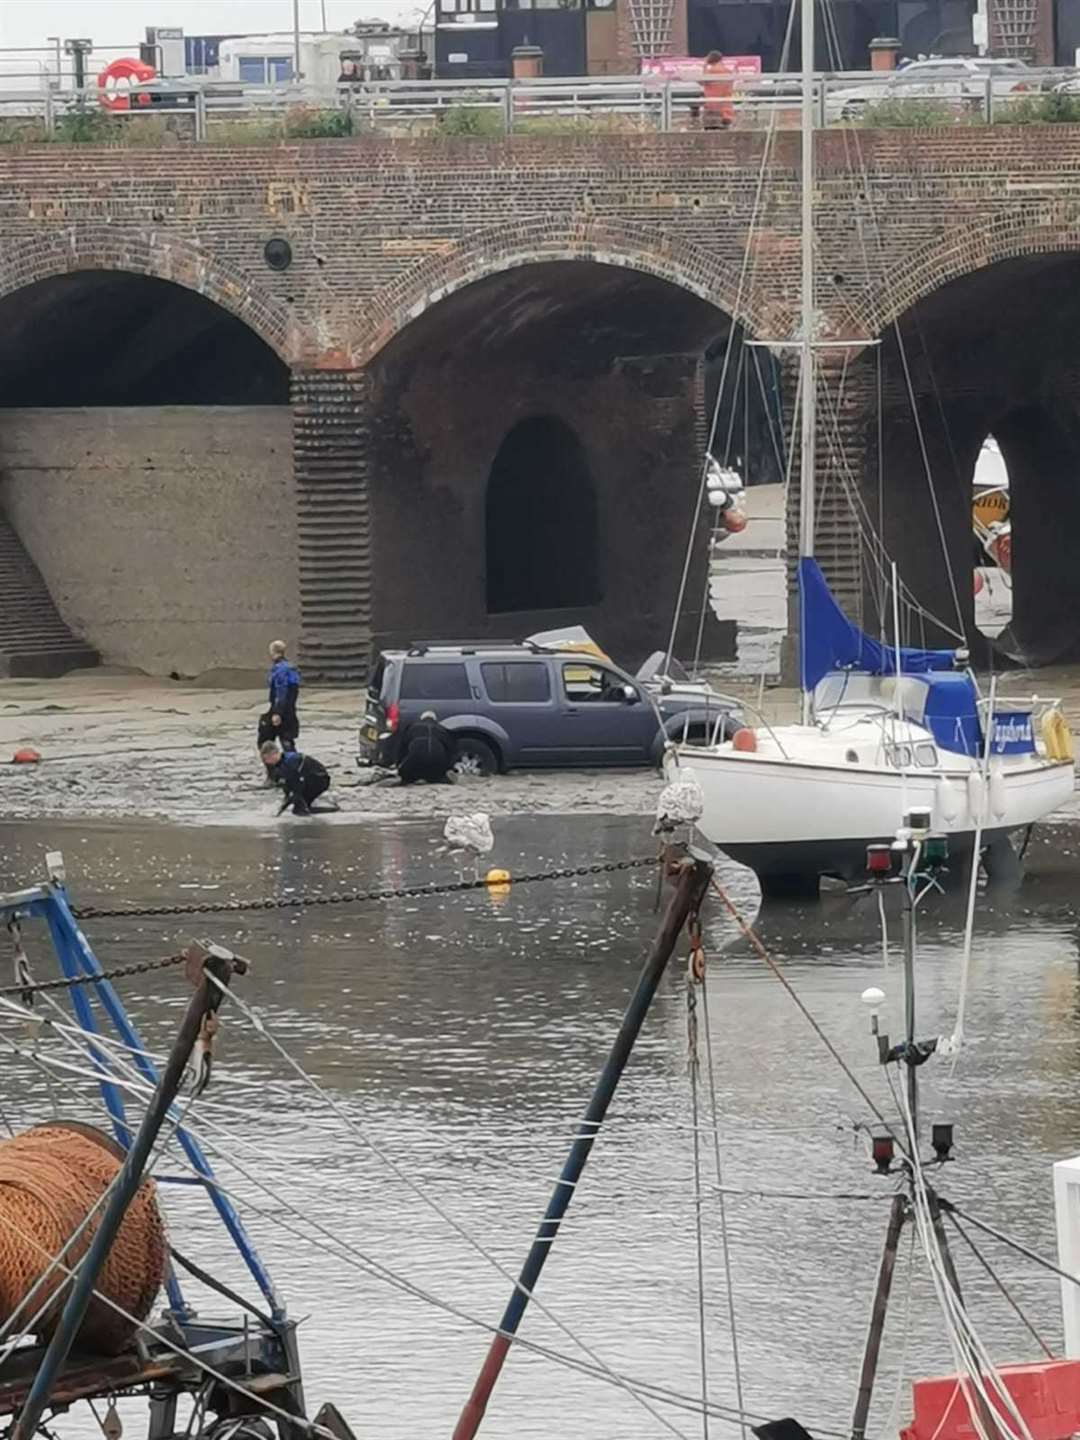 The Nissan was stuck in the mud before being claimed by the tide